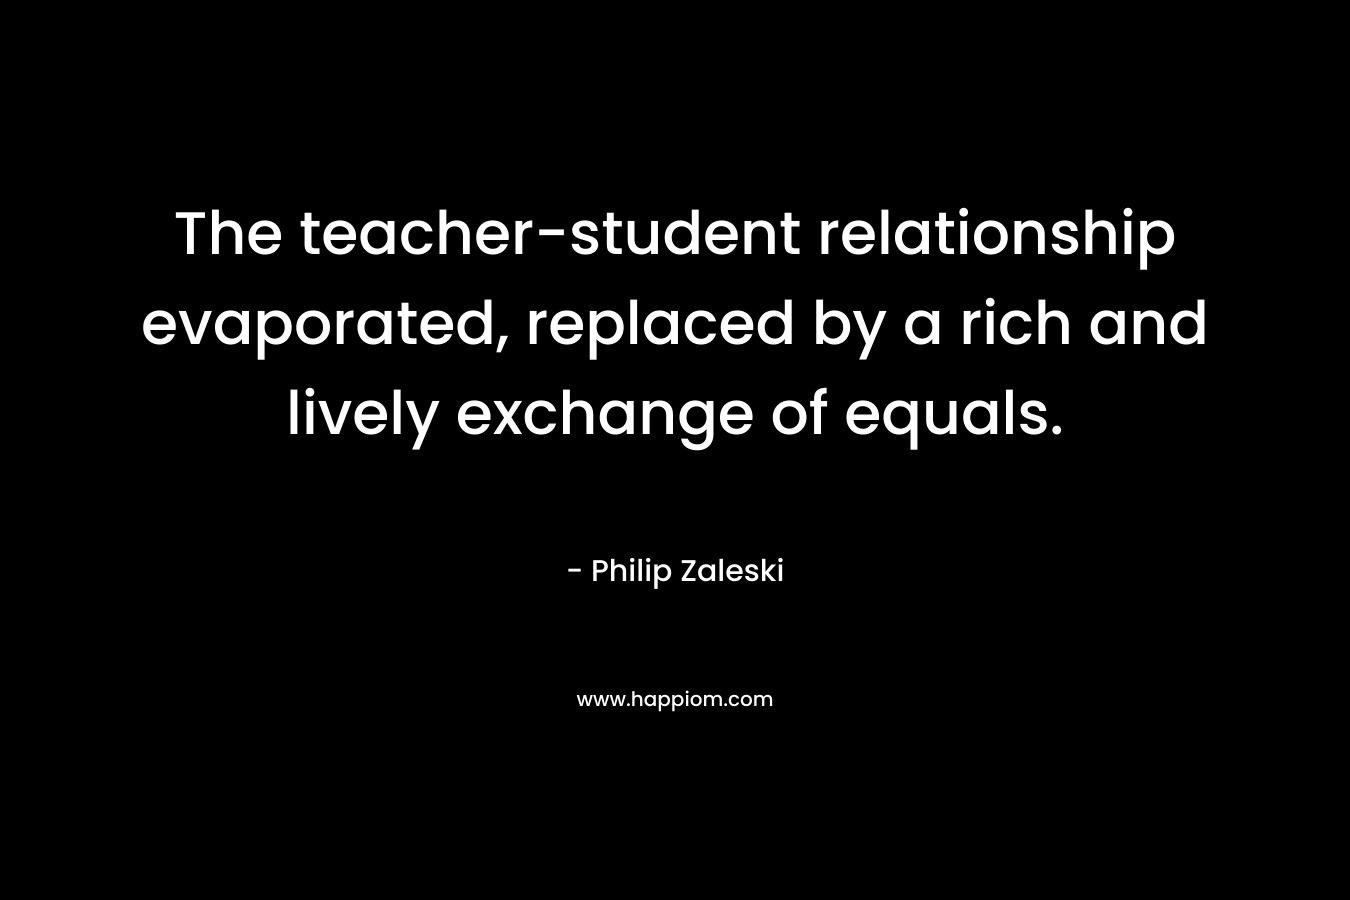 The teacher-student relationship evaporated, replaced by a rich and lively exchange of equals. – Philip Zaleski